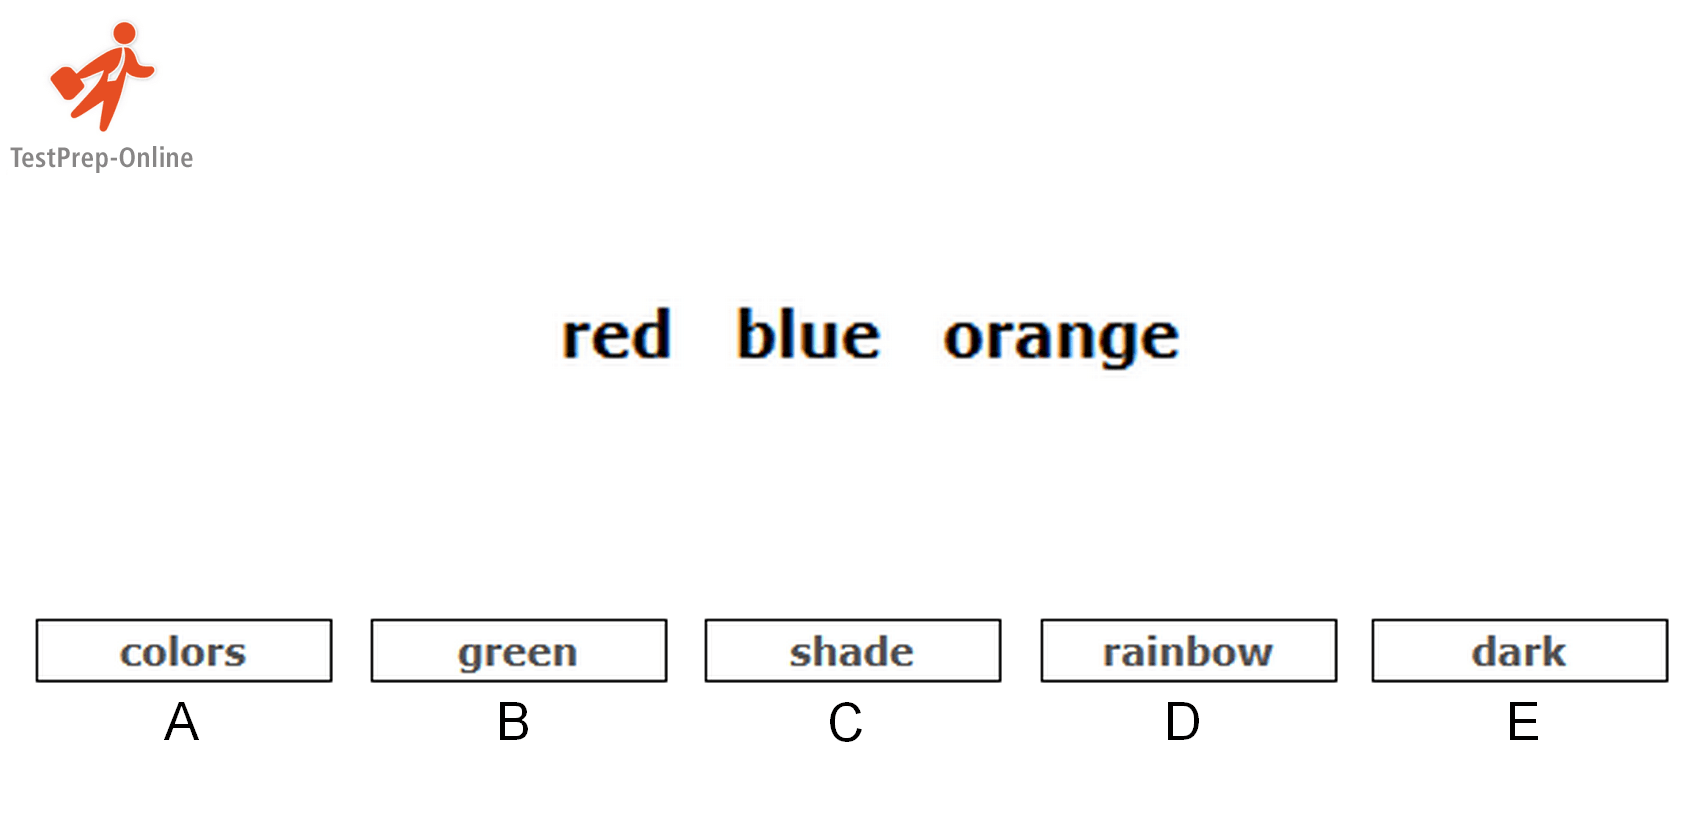 Sample Picture/Verbal Classification Question